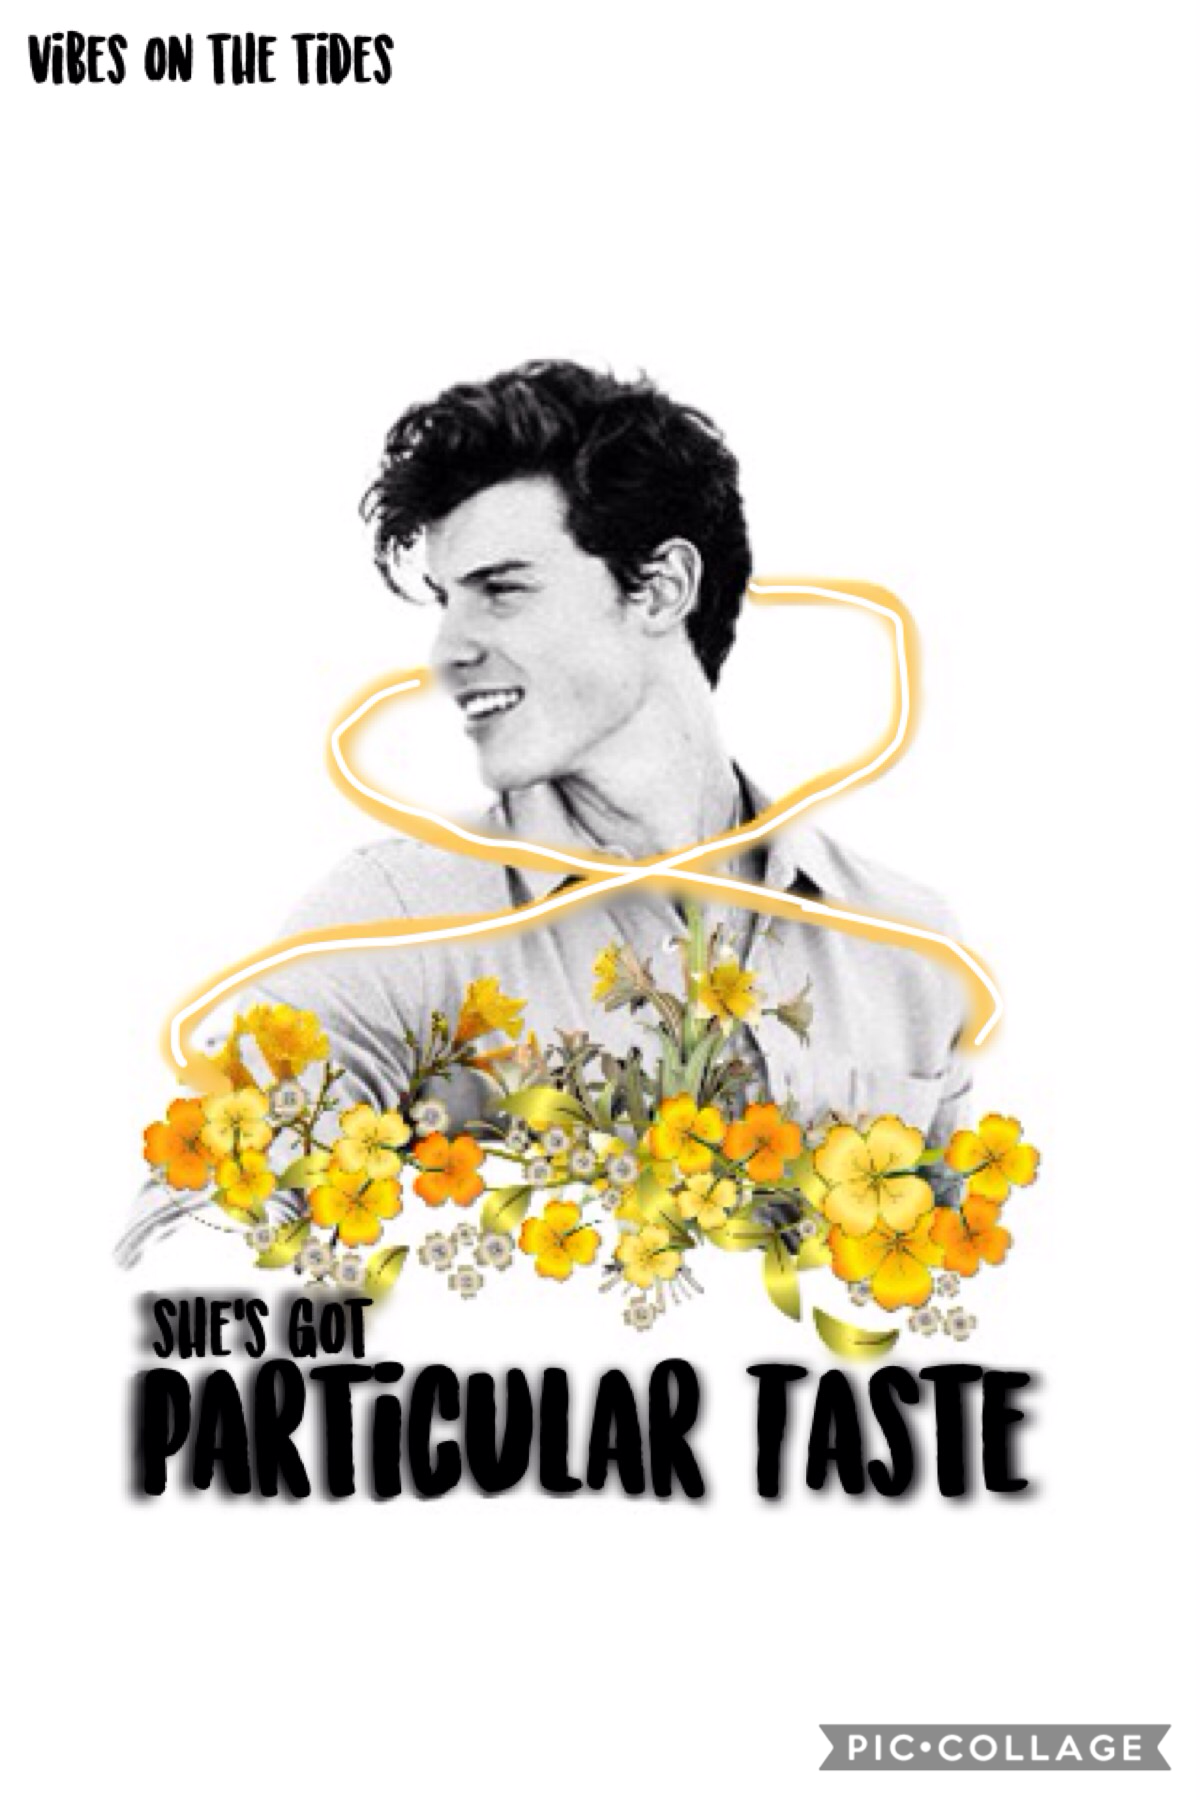 tap 

SHAWN EDIT! 💛💛💛
love this one... first time doing the highlight lines, that's what imma call them😂😂